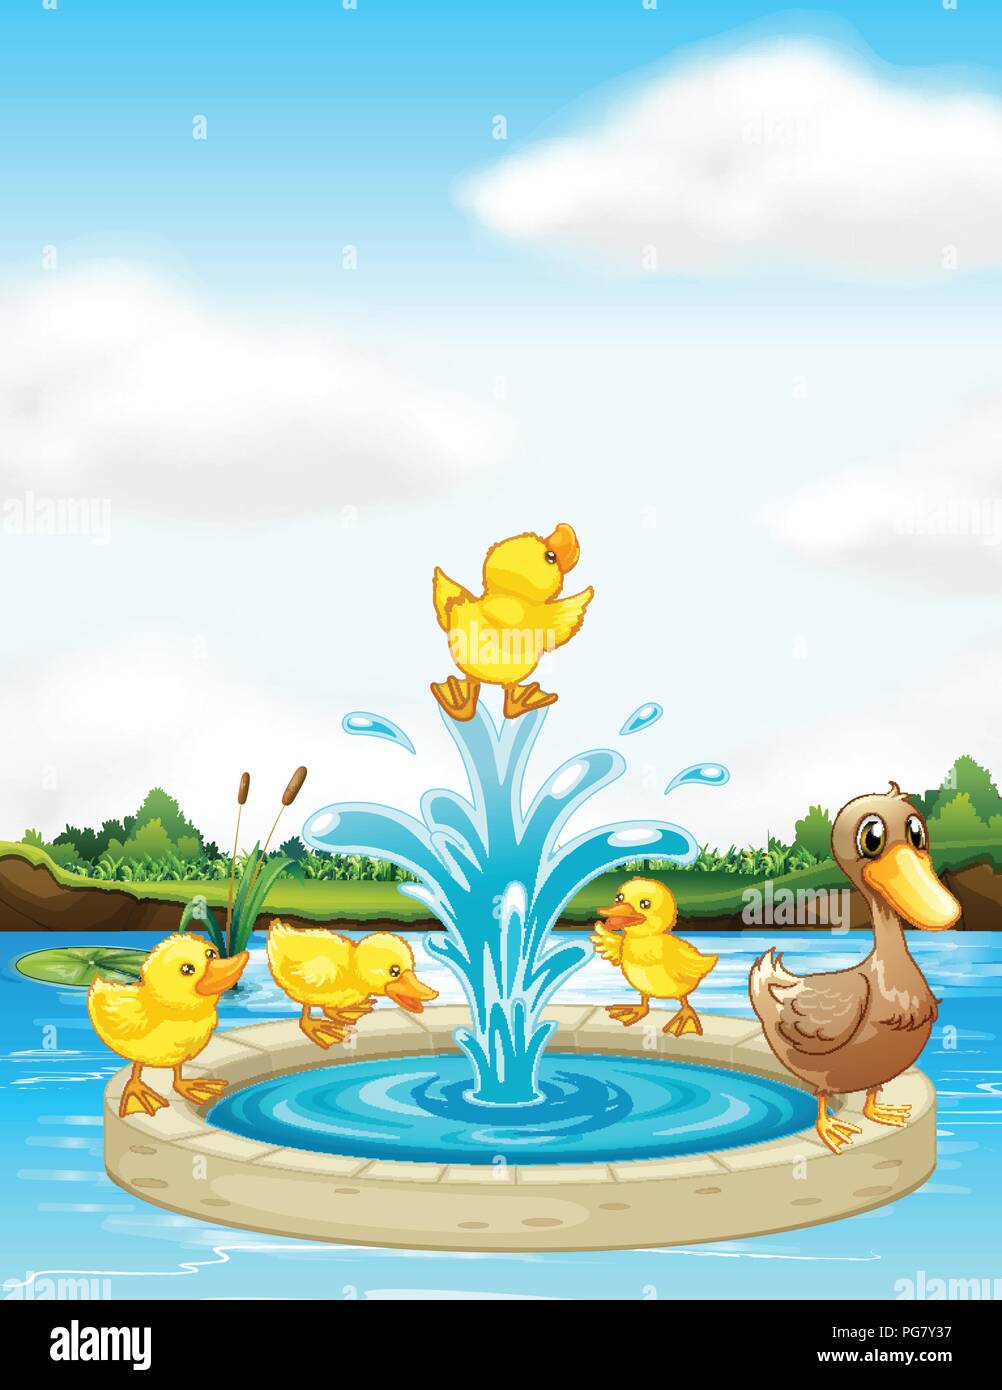 A duck family at the fountain illustration Stock Vector